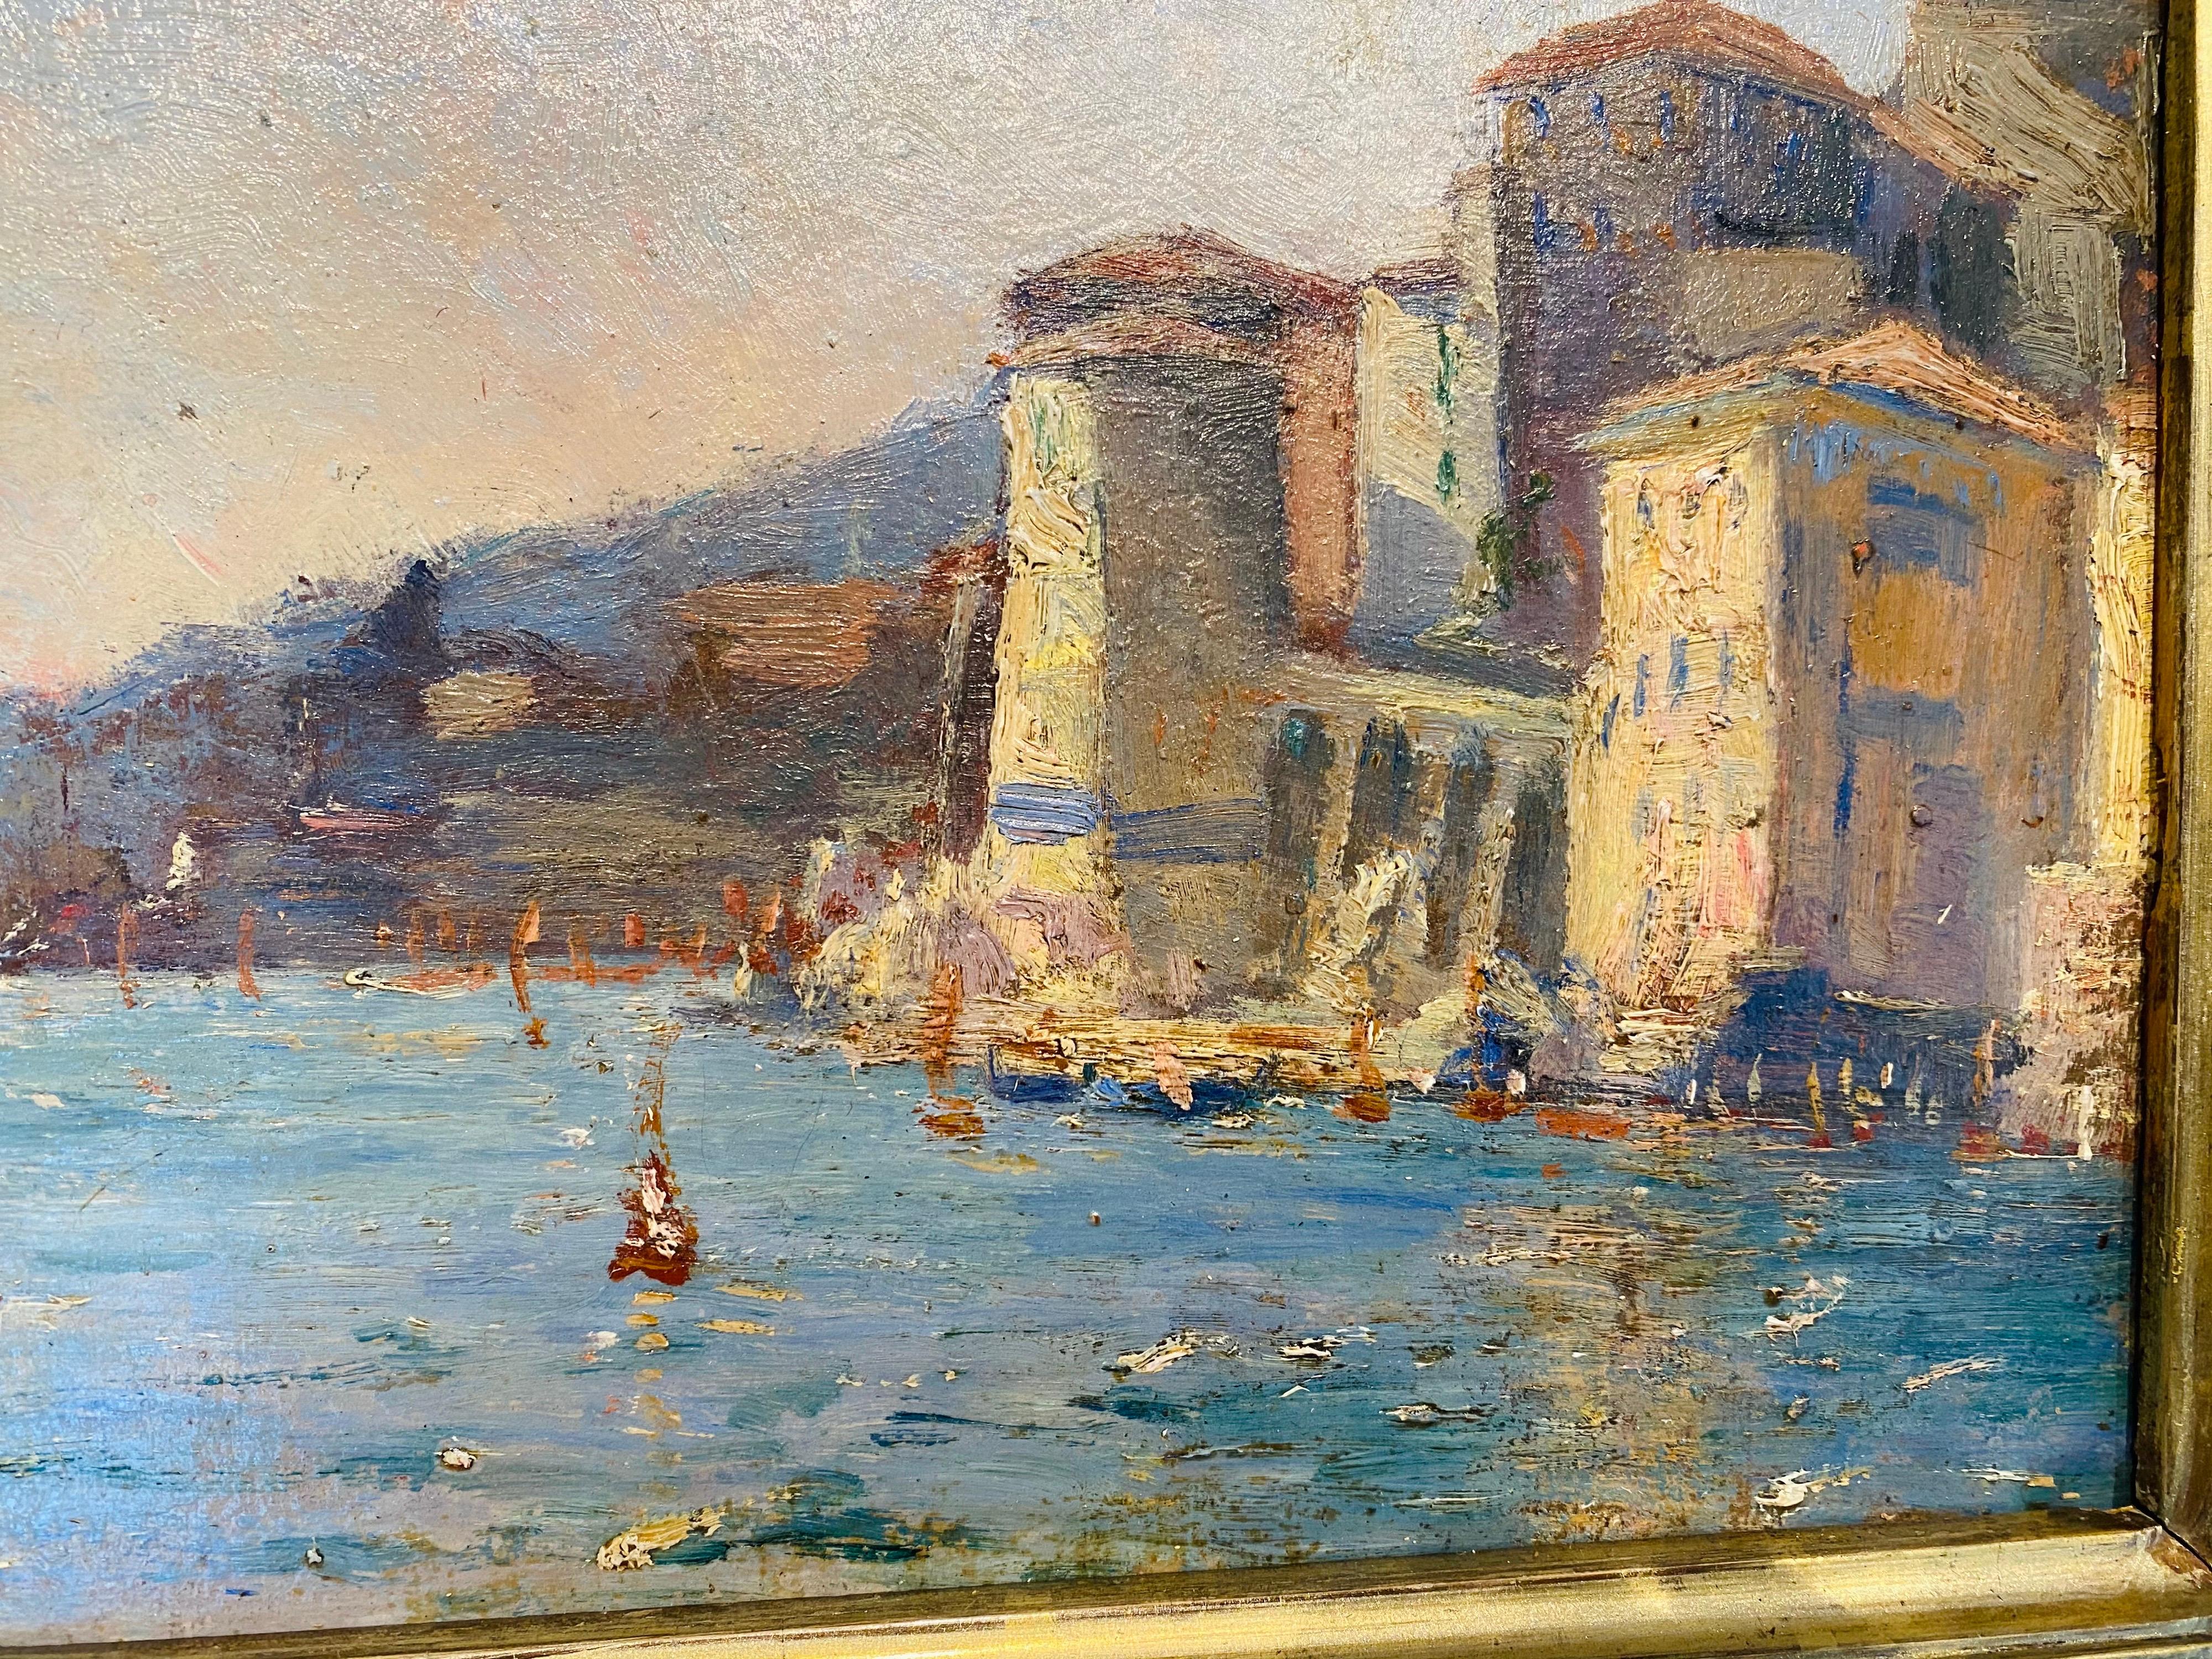 French 19th century impressionist painting Mediterranean Harbour - Cote d'Azur - Brown Landscape Painting by Unknown